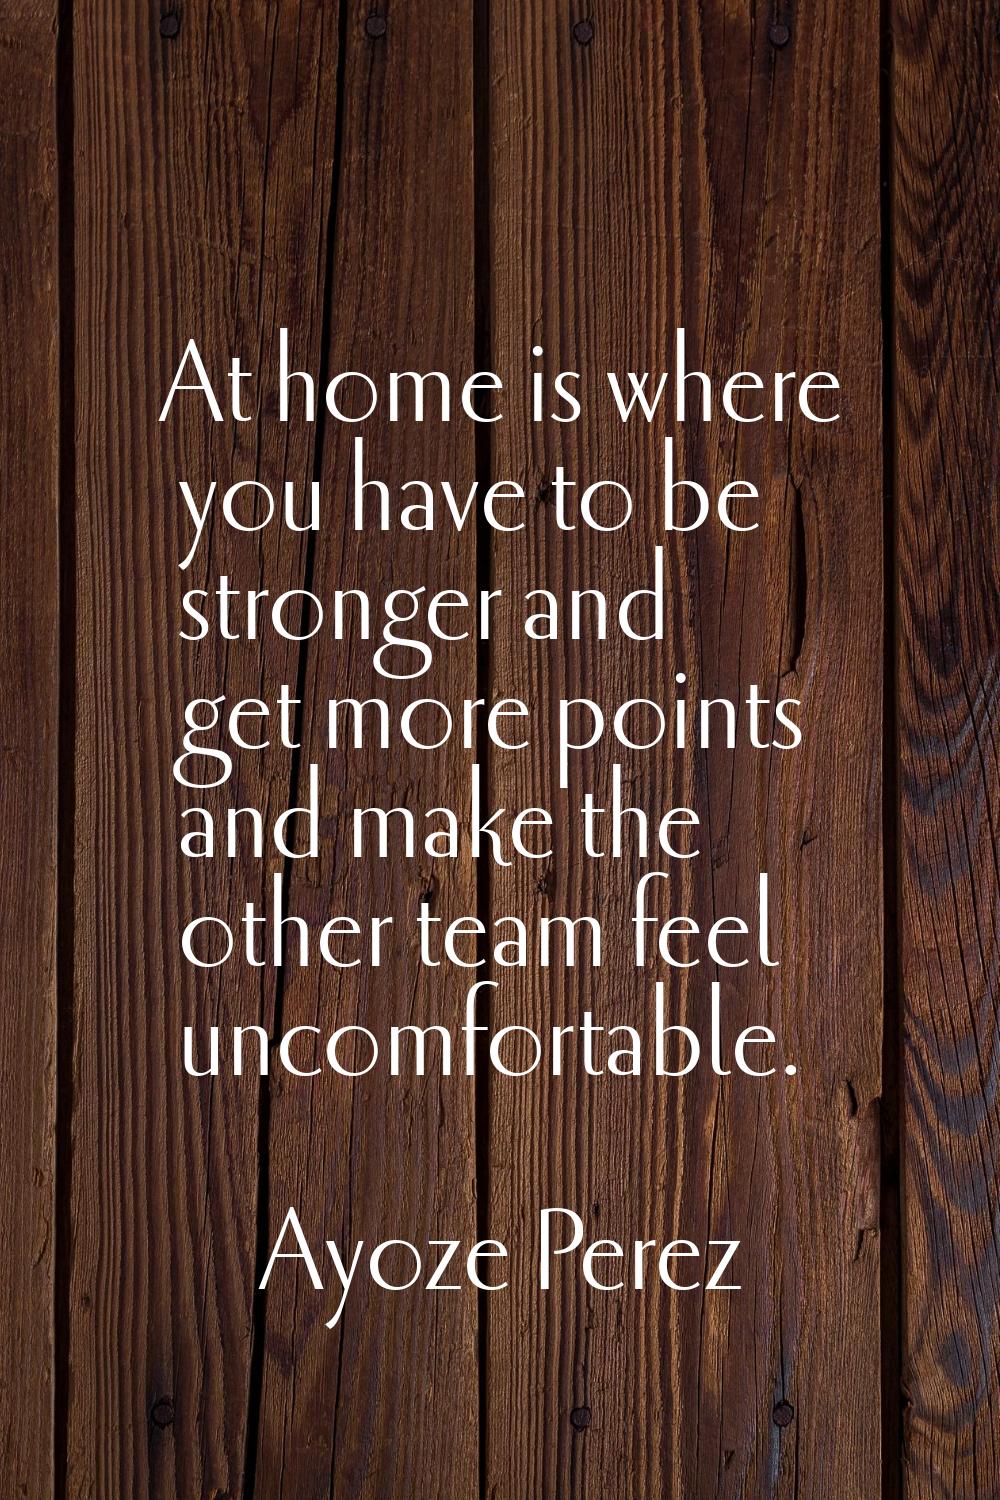 At home is where you have to be stronger and get more points and make the other team feel uncomfort